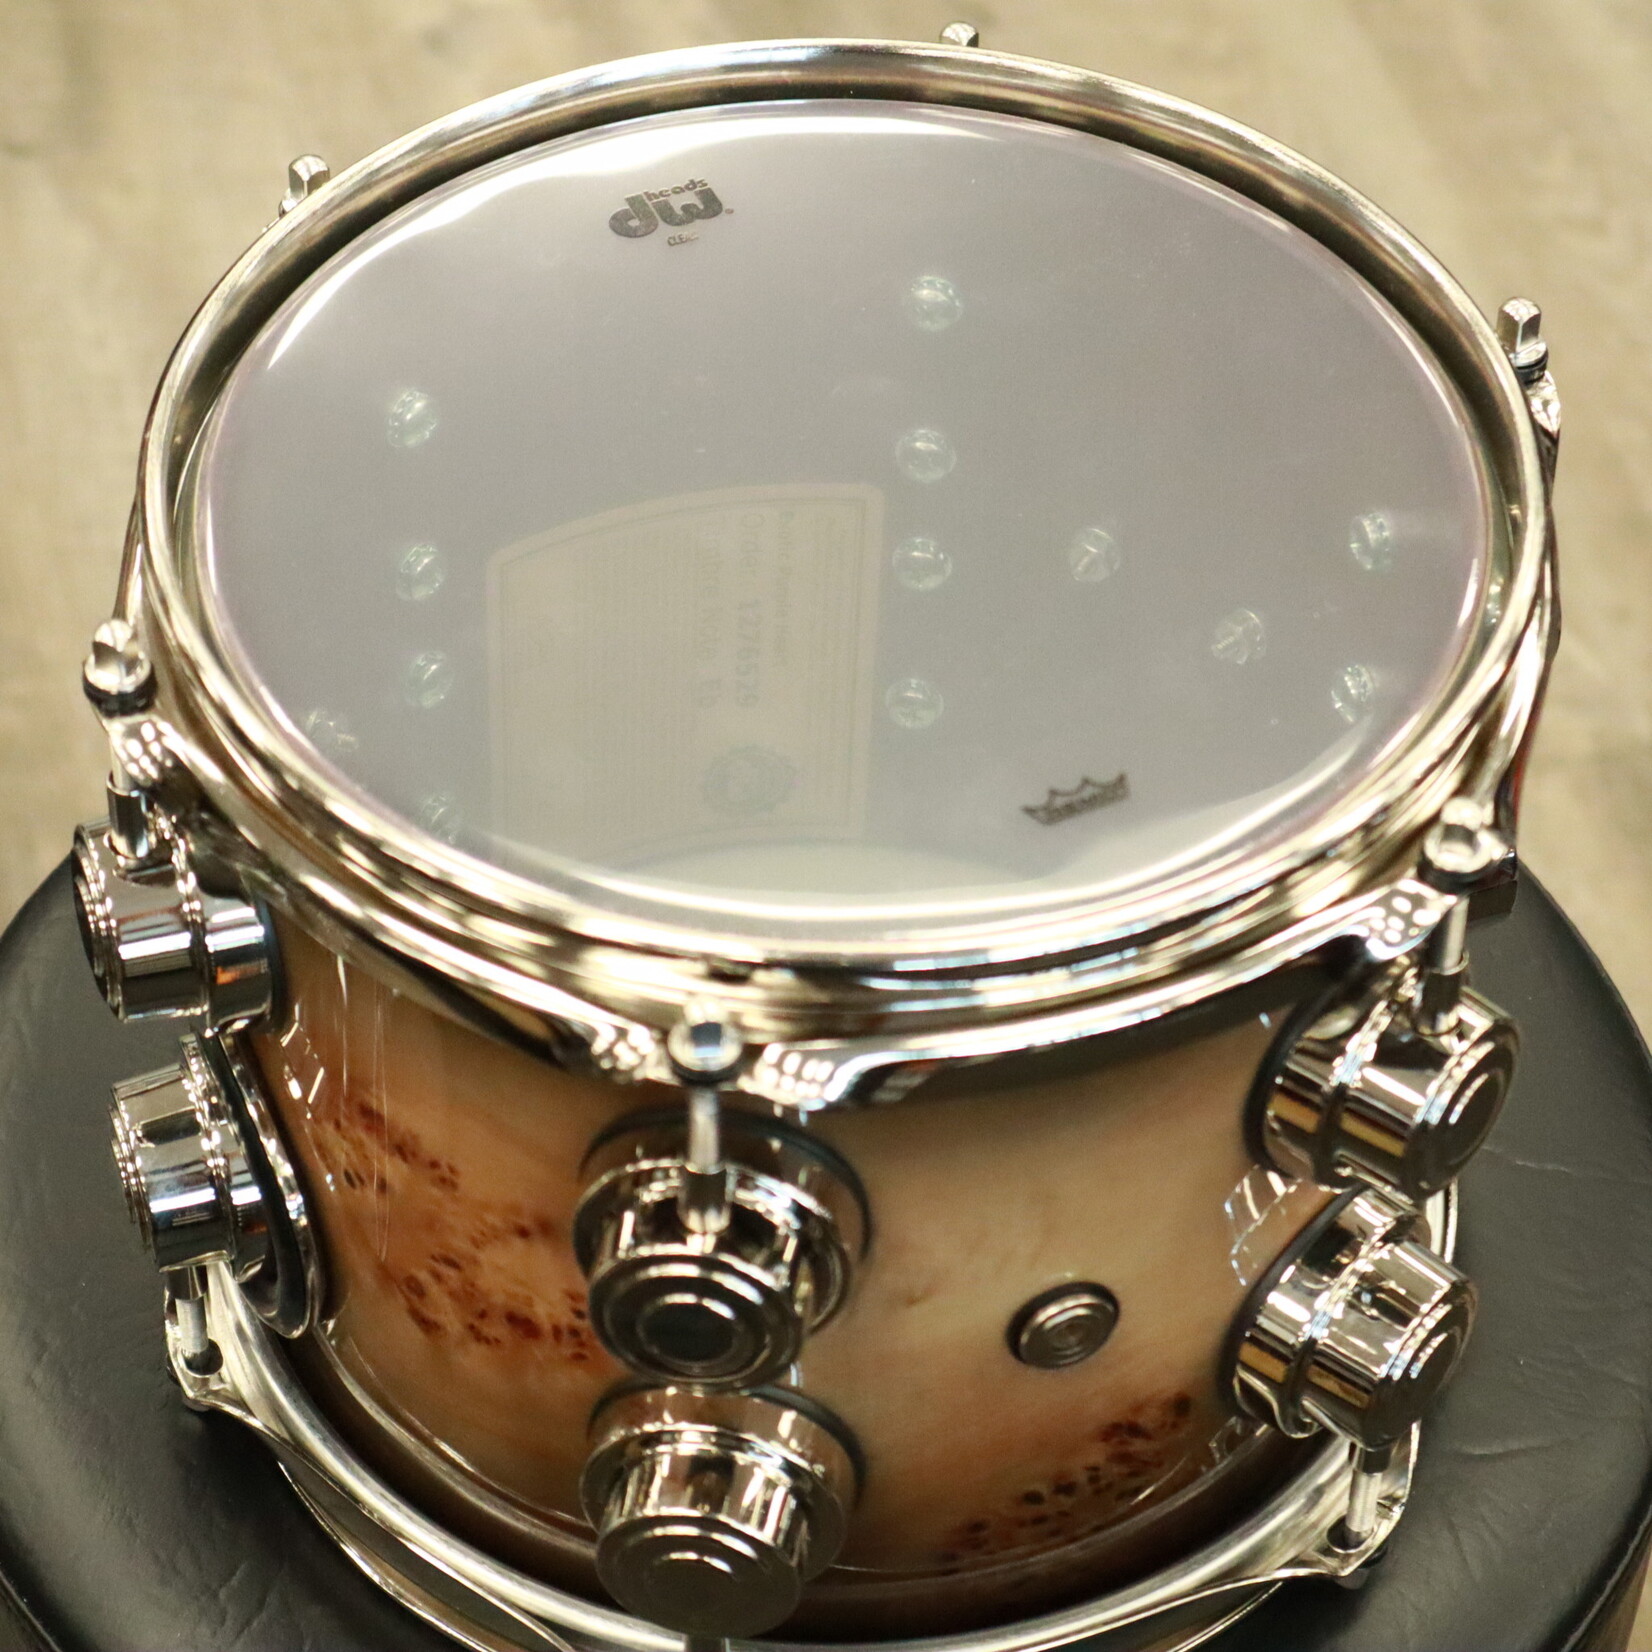 DW DW Collector's Series Exotic Purpleheart 7x8" Tom (Natural to Candy Black Burst over Mapa Burl w/ Nickel Hardware)